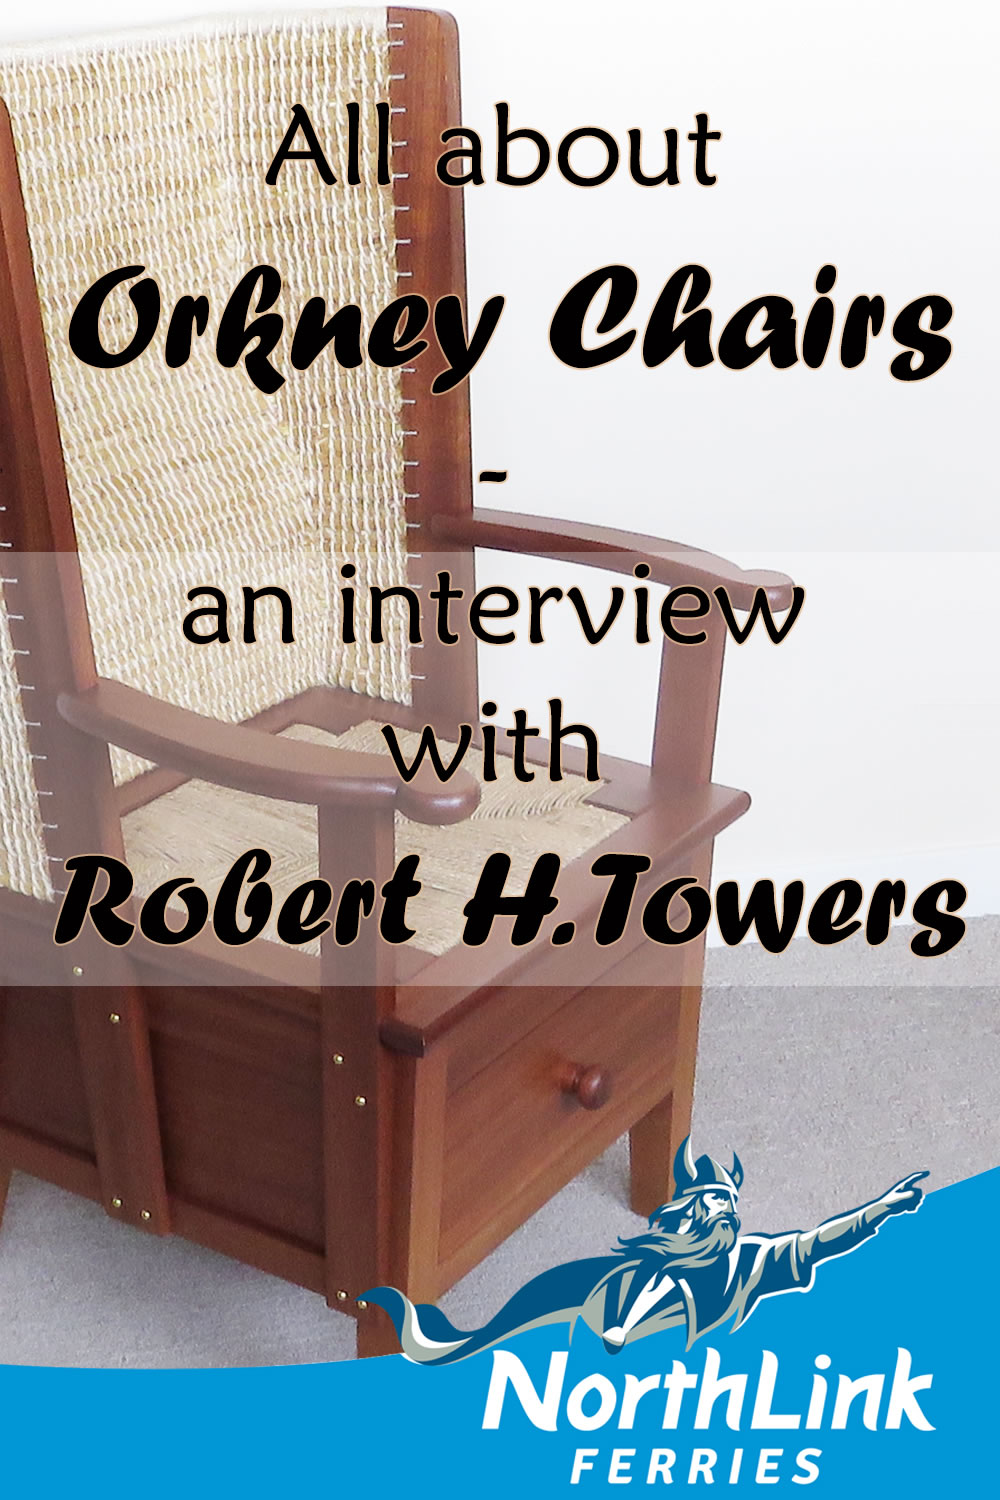 All about Orkney Chairs - an interview with Robert H. Towers